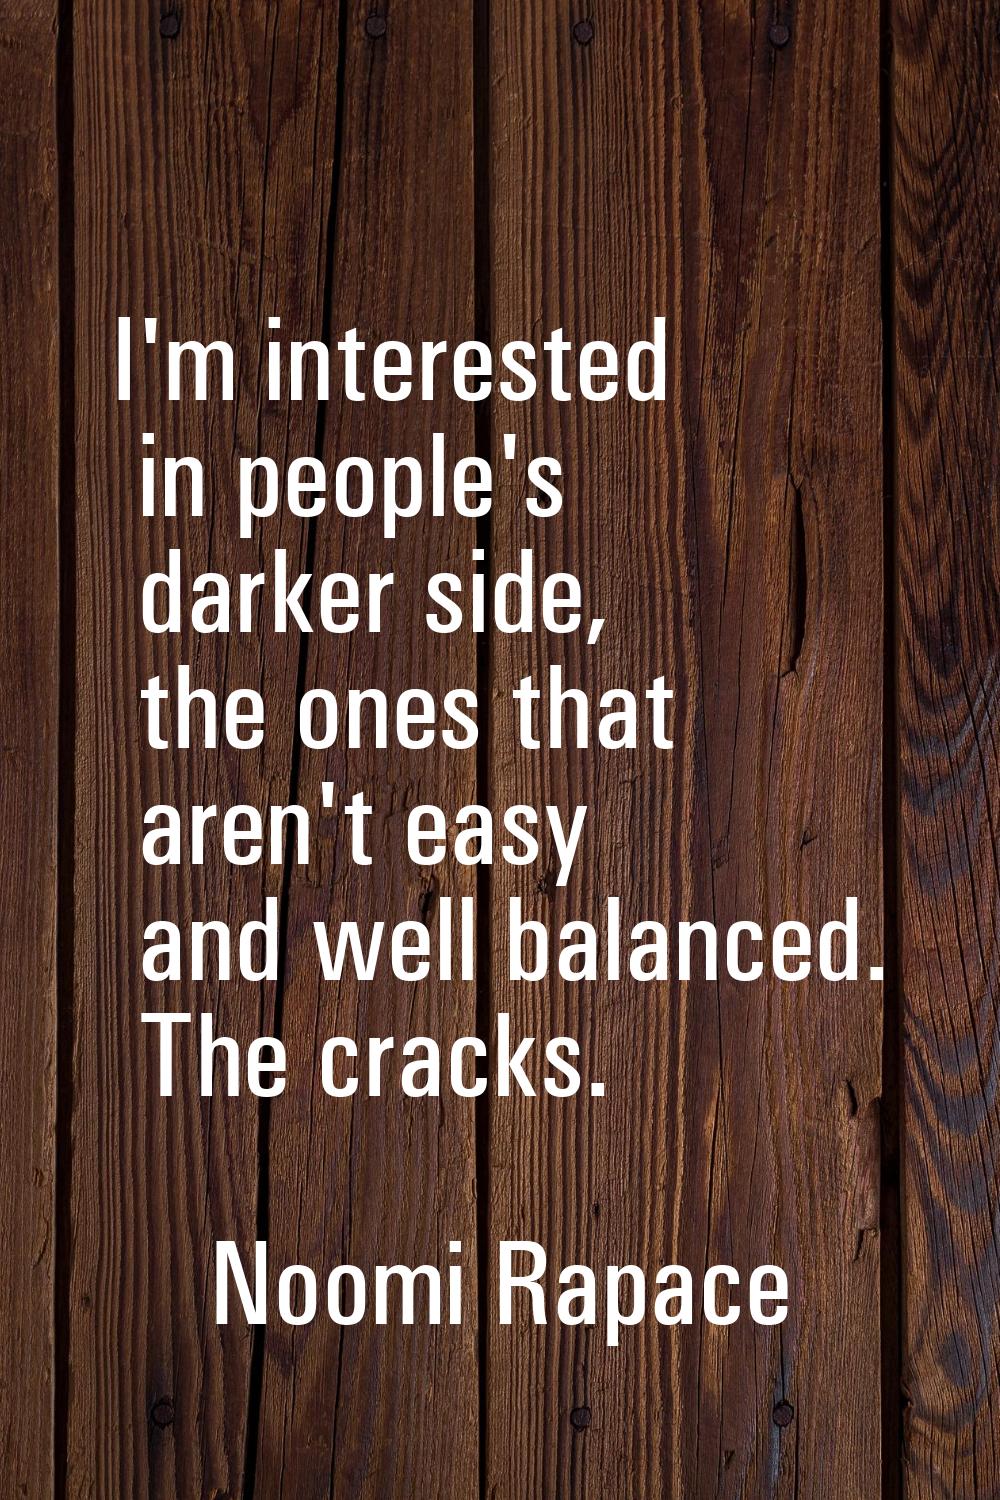 I'm interested in people's darker side, the ones that aren't easy and well balanced. The cracks.